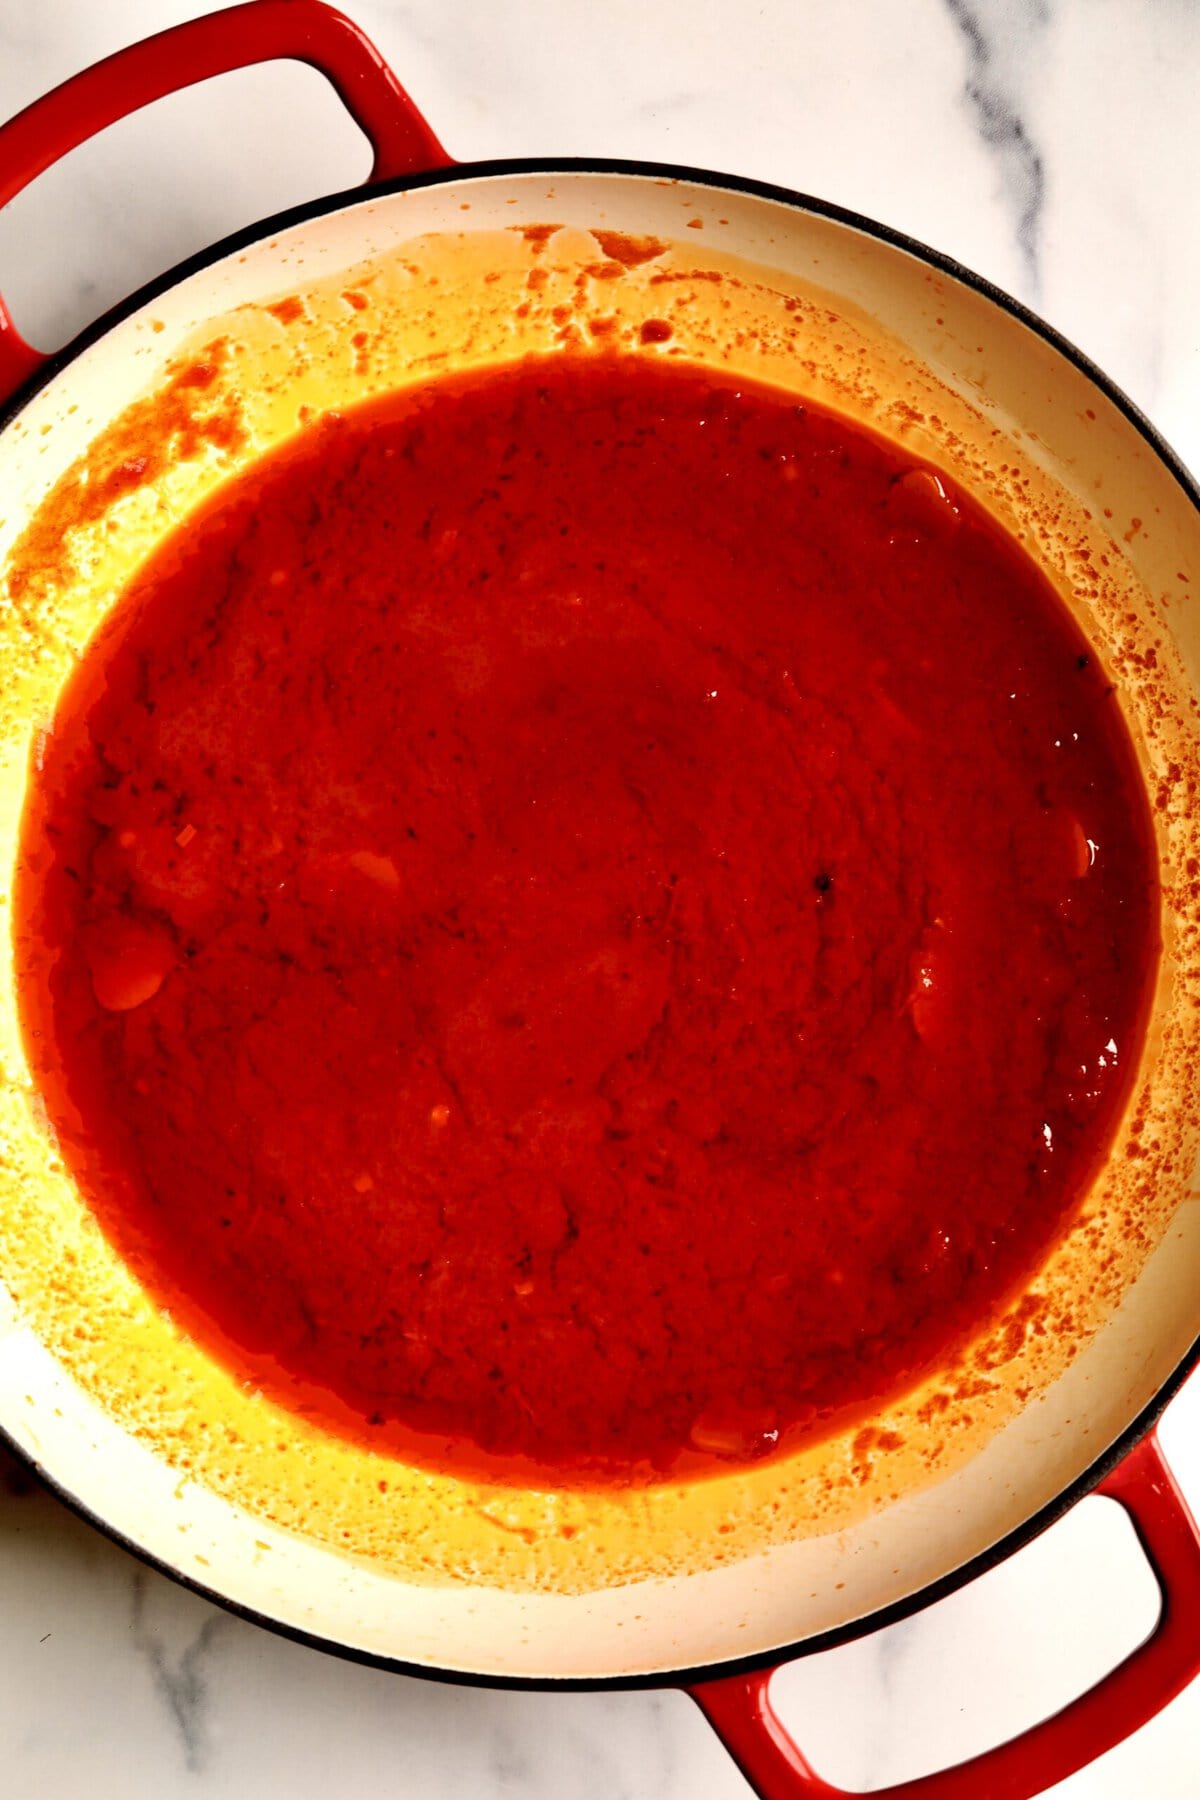 How to make: Quick Tomato Paste Pasta Sauce Recipe with Spaghetti- add the tomato paste to the pan and let it caramelize. Then, add pasta water and bring to a simmer.